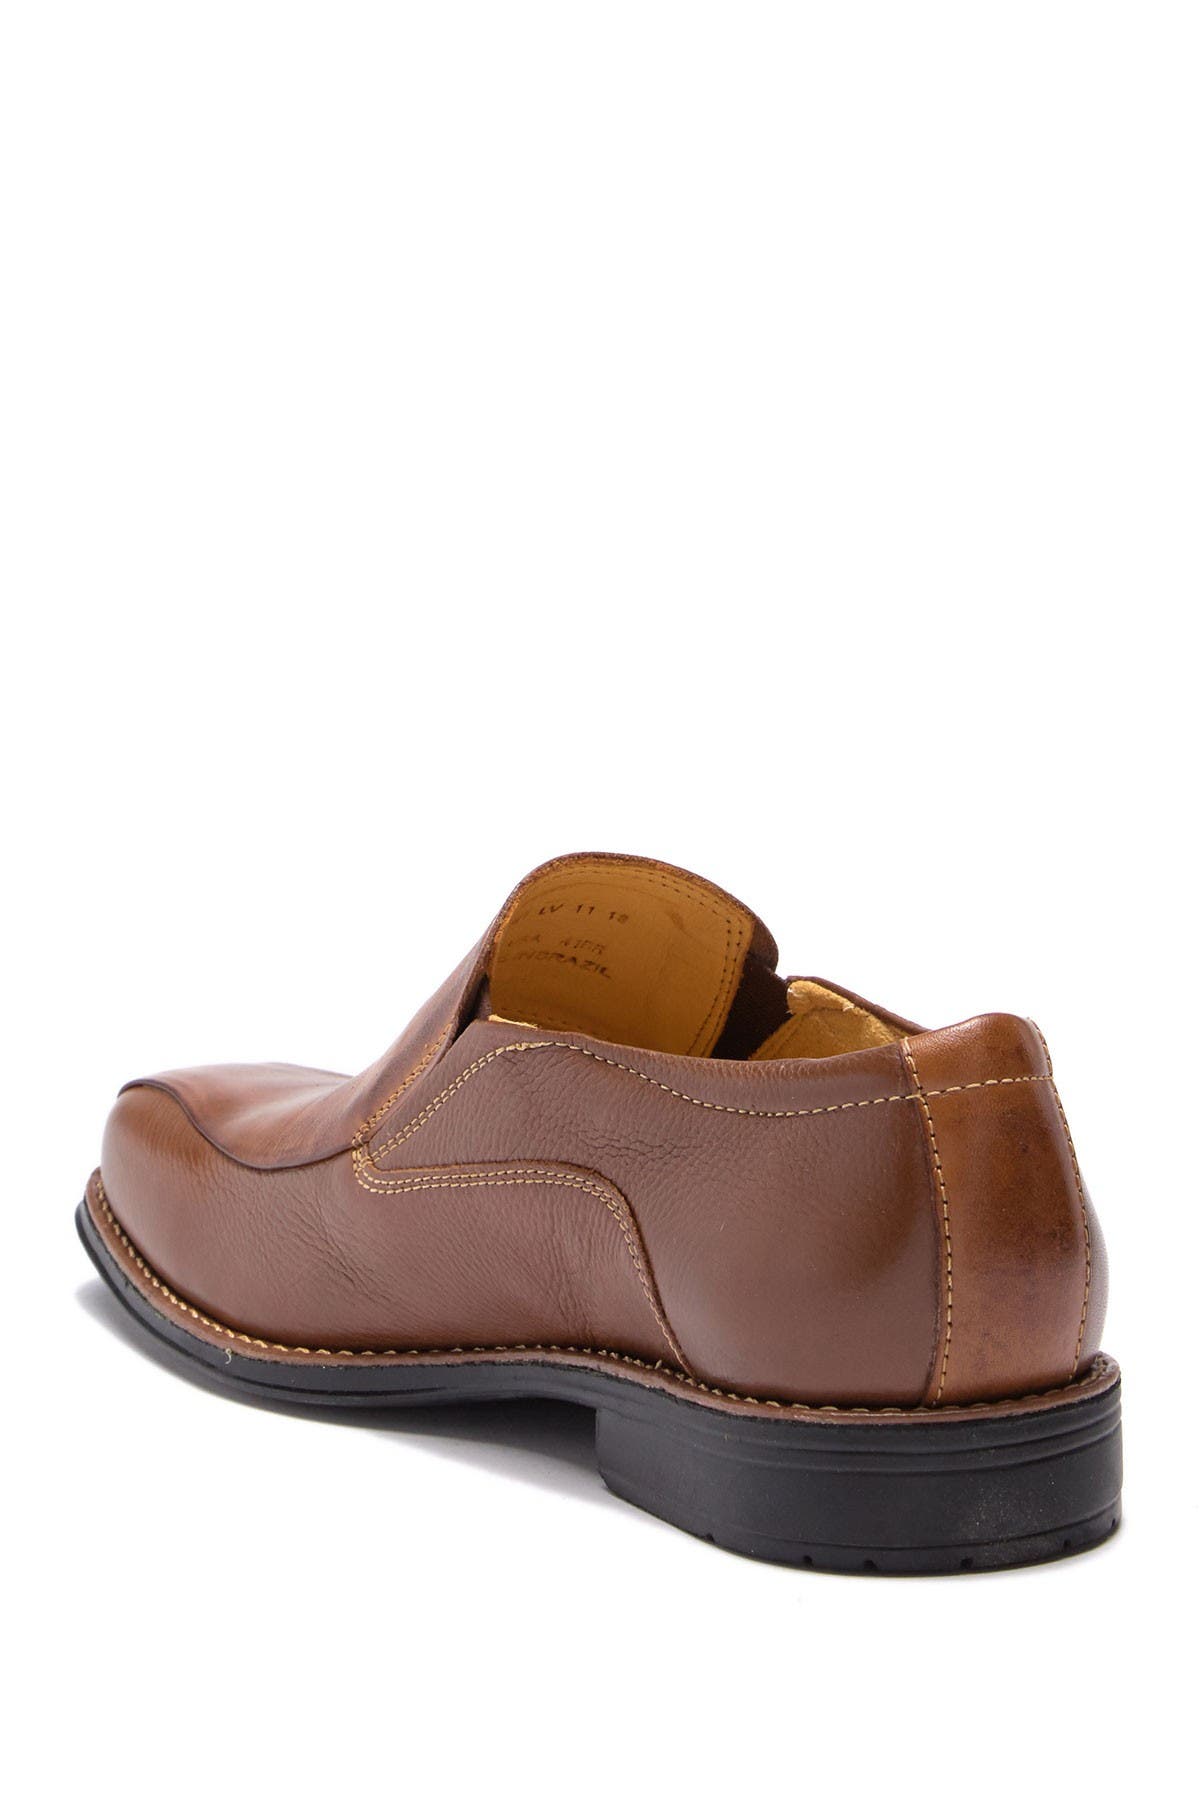 Sandro Moscoloni | Edwin Loafer - Extra 